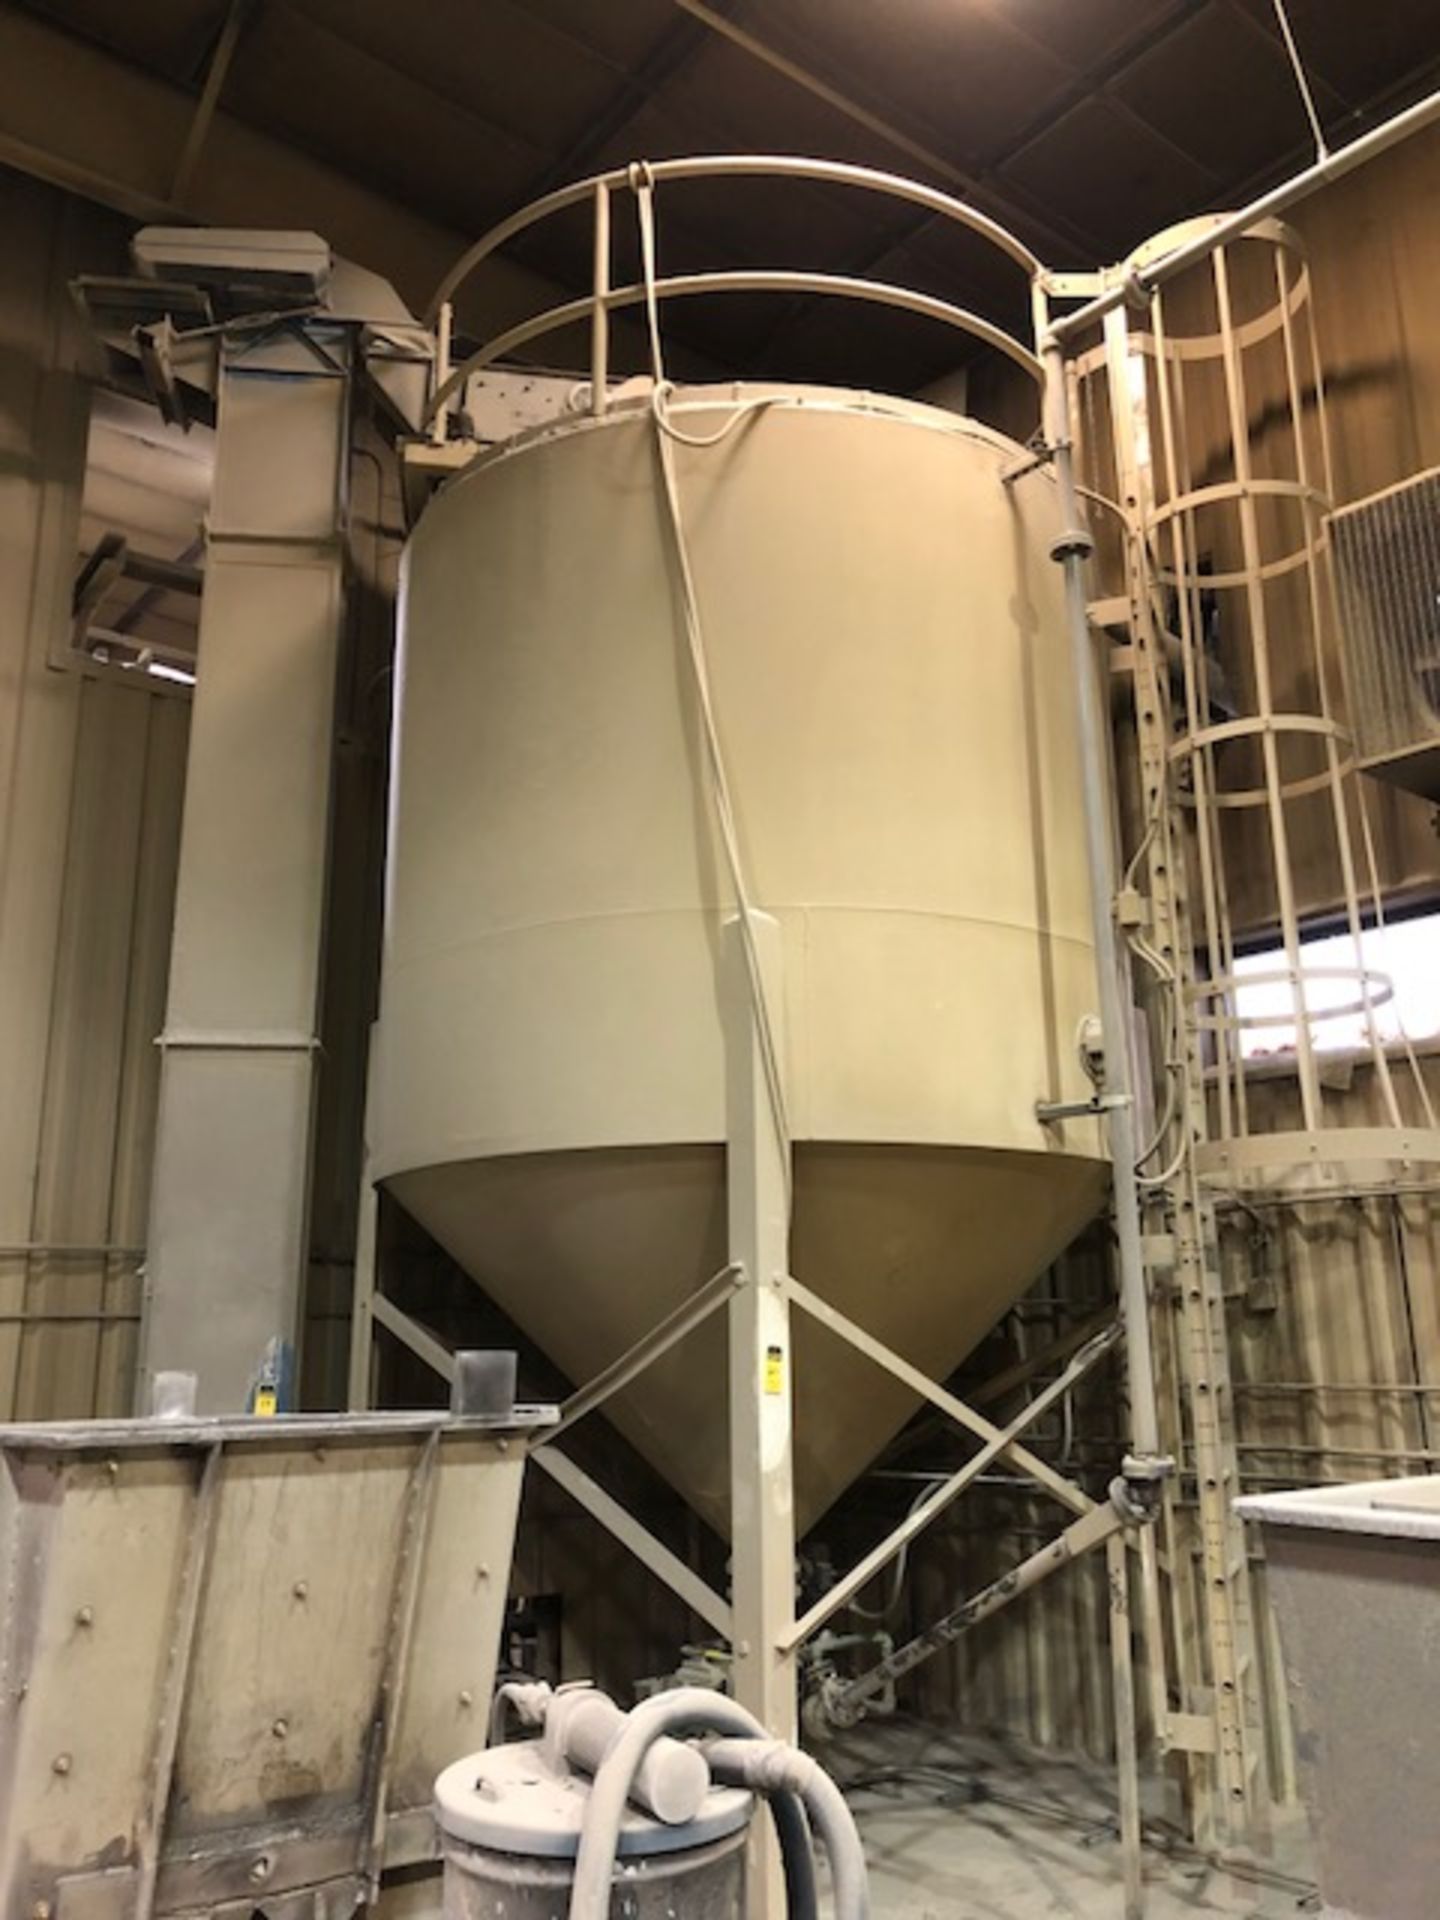 approx. 70 ton silo 10’ diameter, subject to group bid lot#57 - removal available November 12, 2018